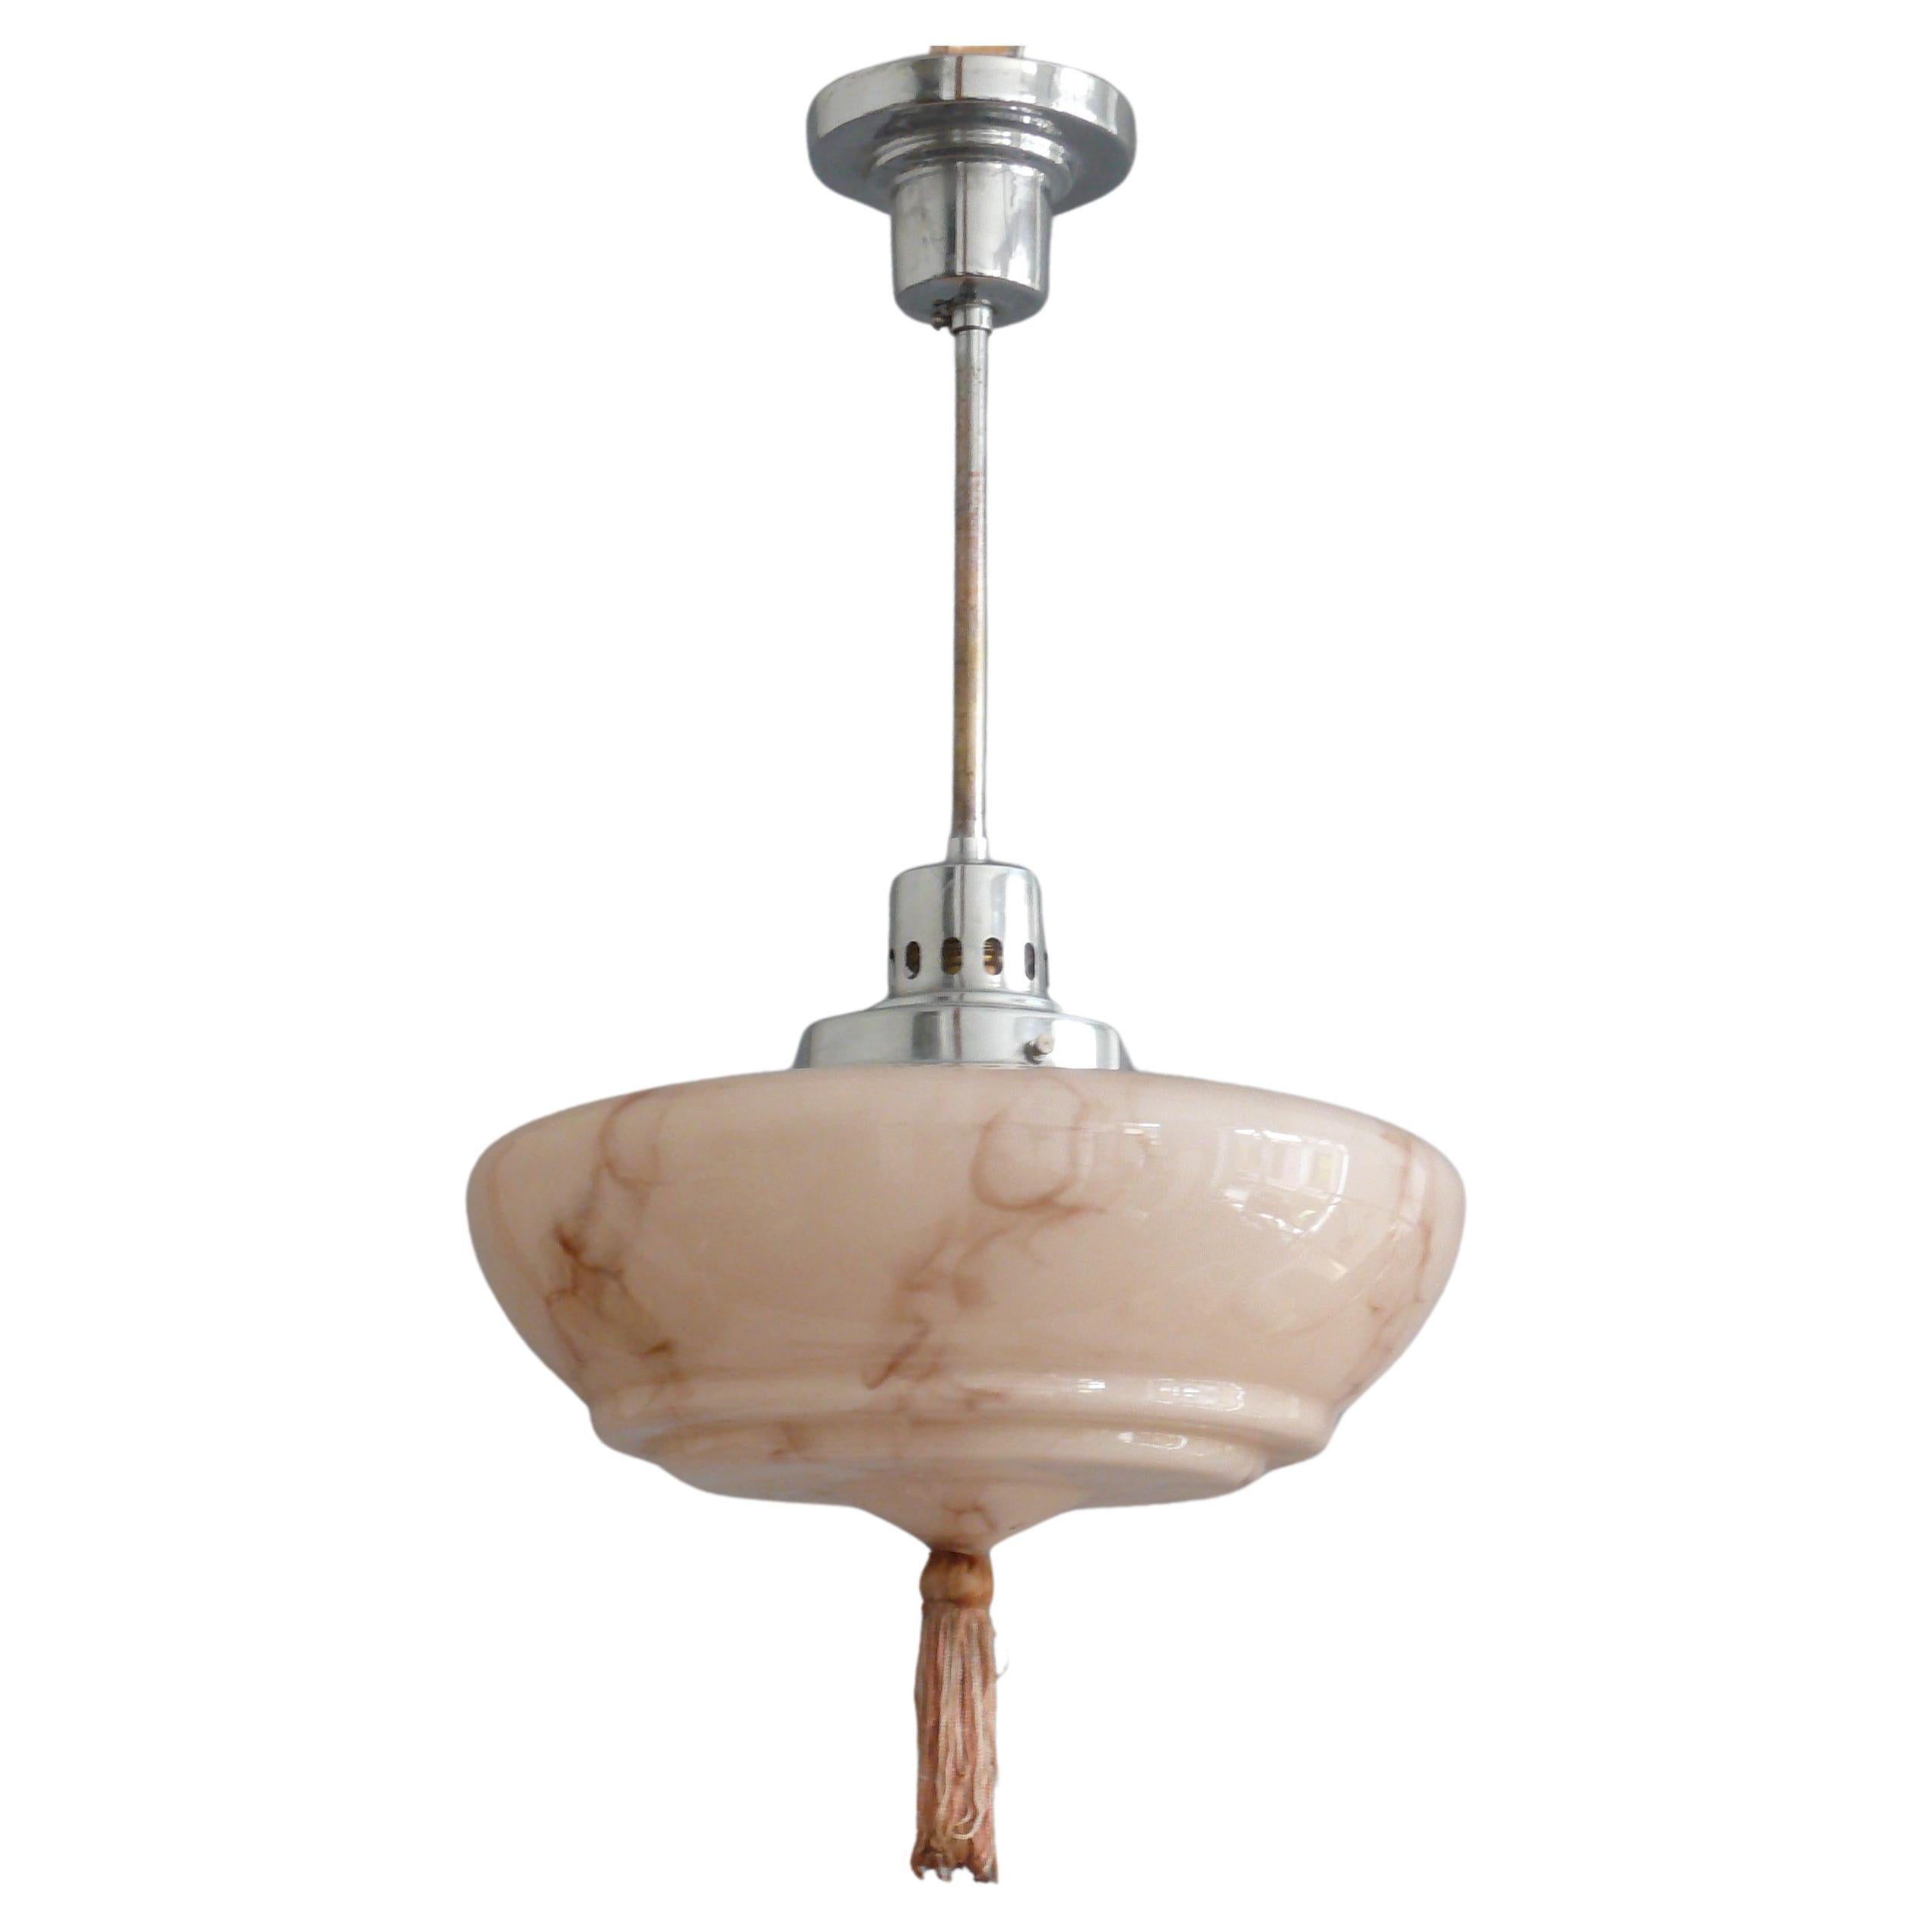 Art Déco Pendant Light With Marbled Glass, 1930s For Sale